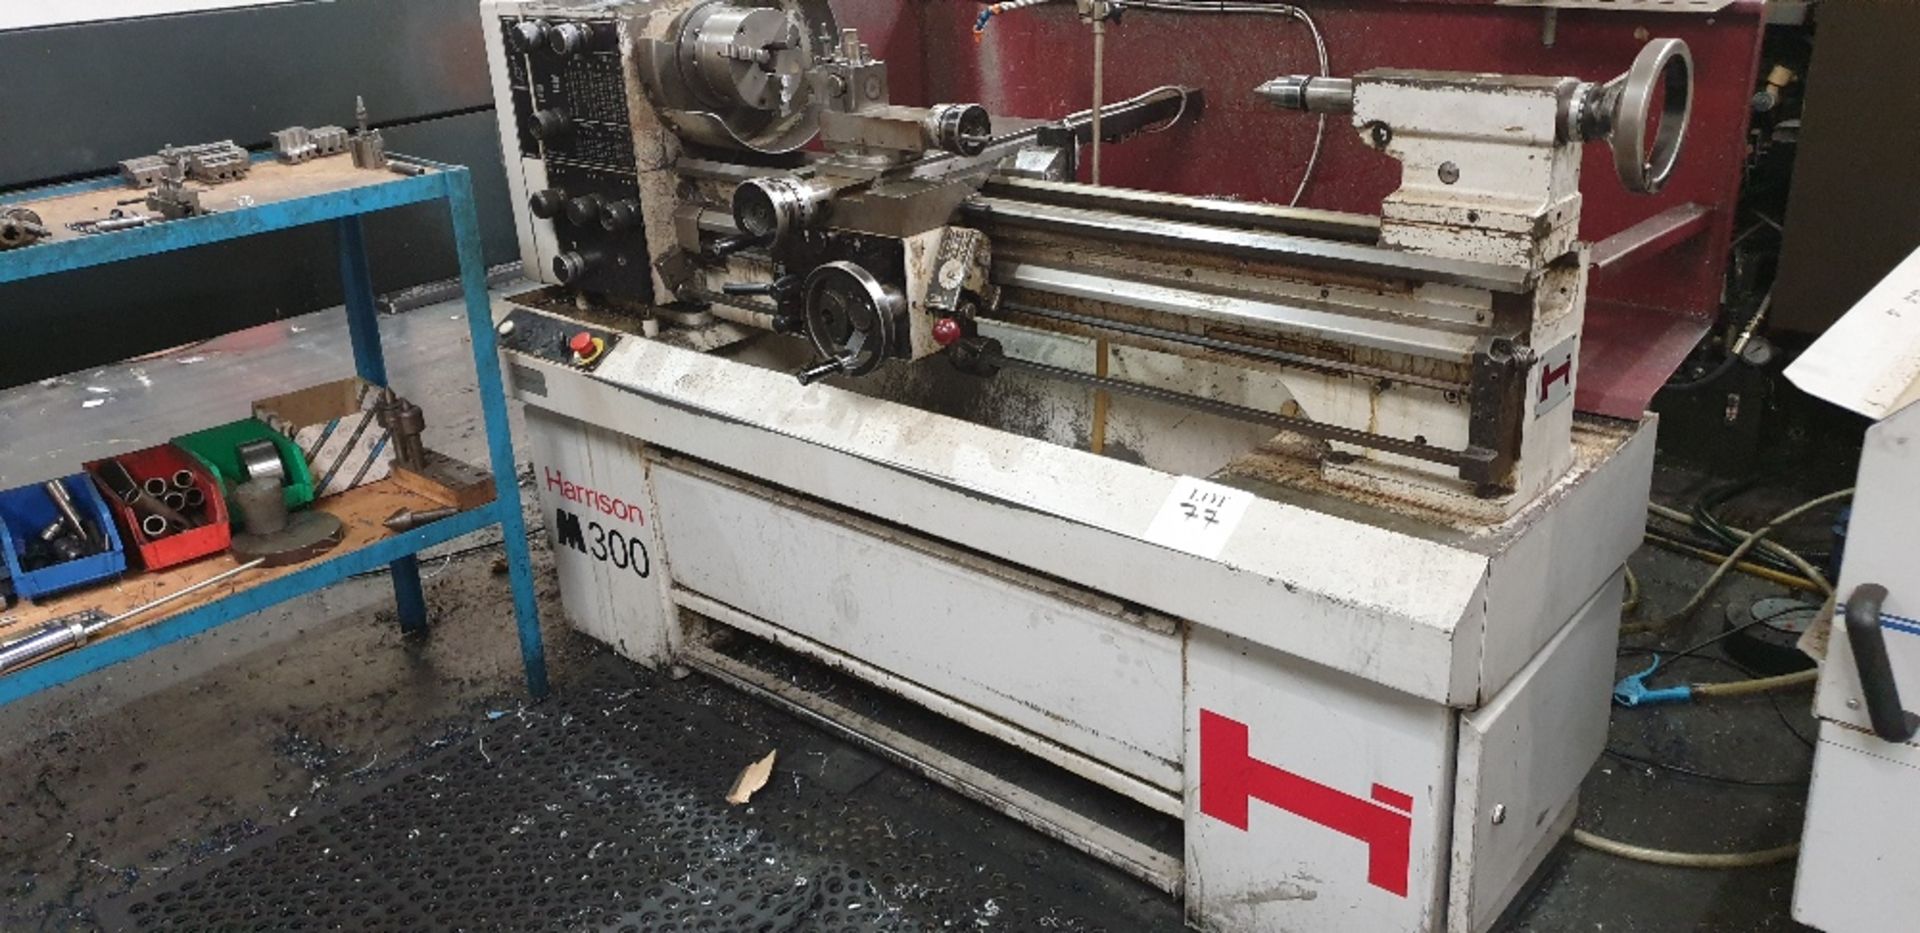 Harrison M300 gap bed centre lathe 230mm swing 1000mm between centres with Acu-Rite digital